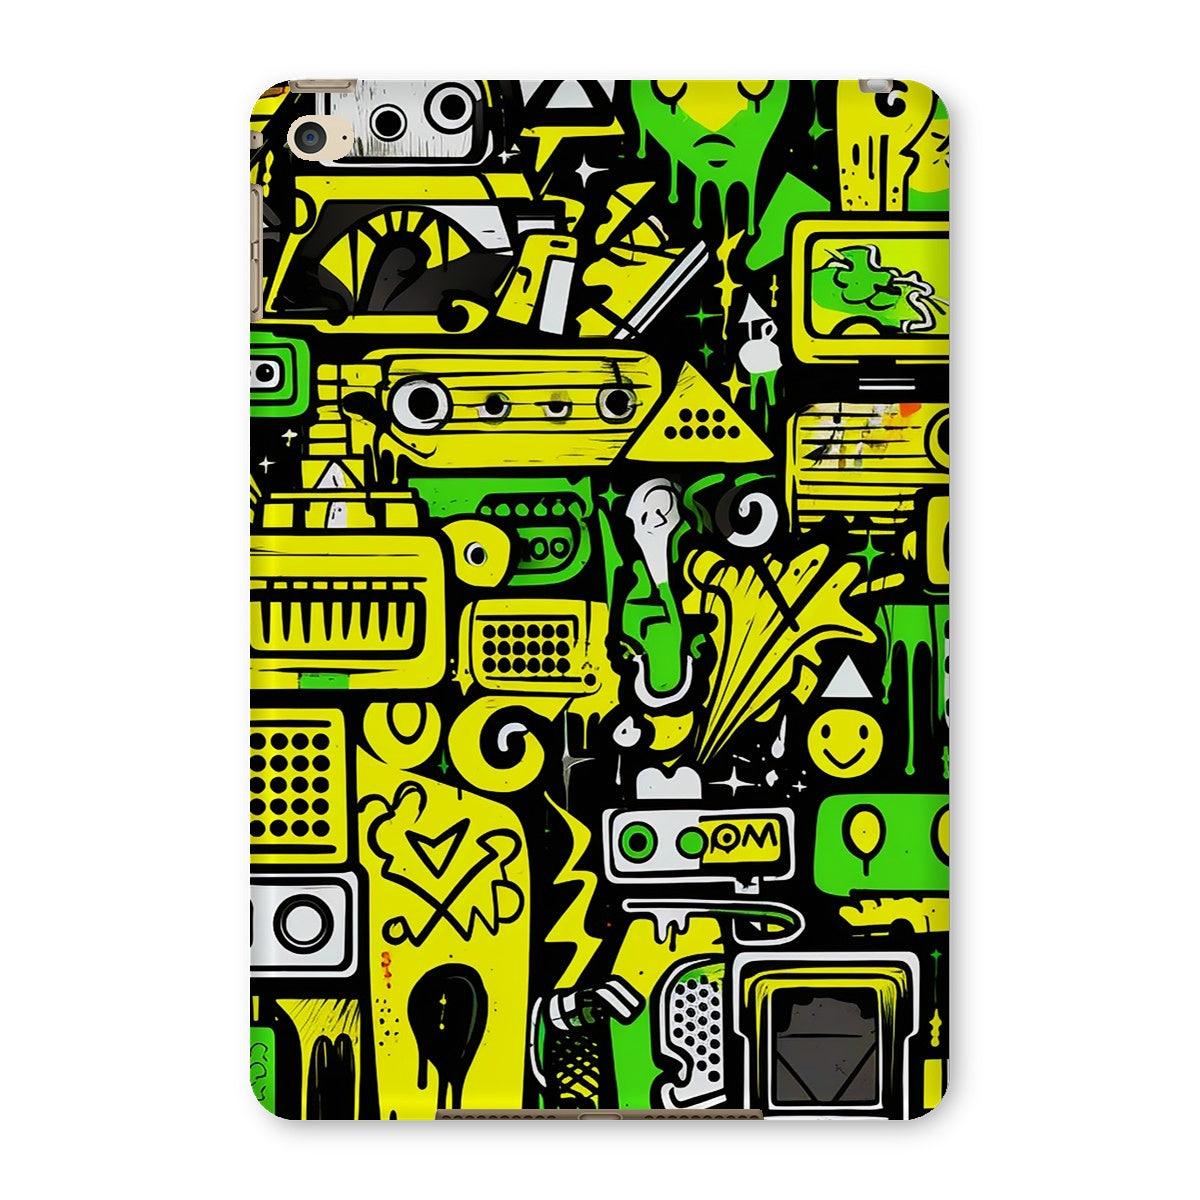 Graffiti Green and Yellow Abstract: A Dive into Vibrant Urban Art Tablet Cases - D'Sare 